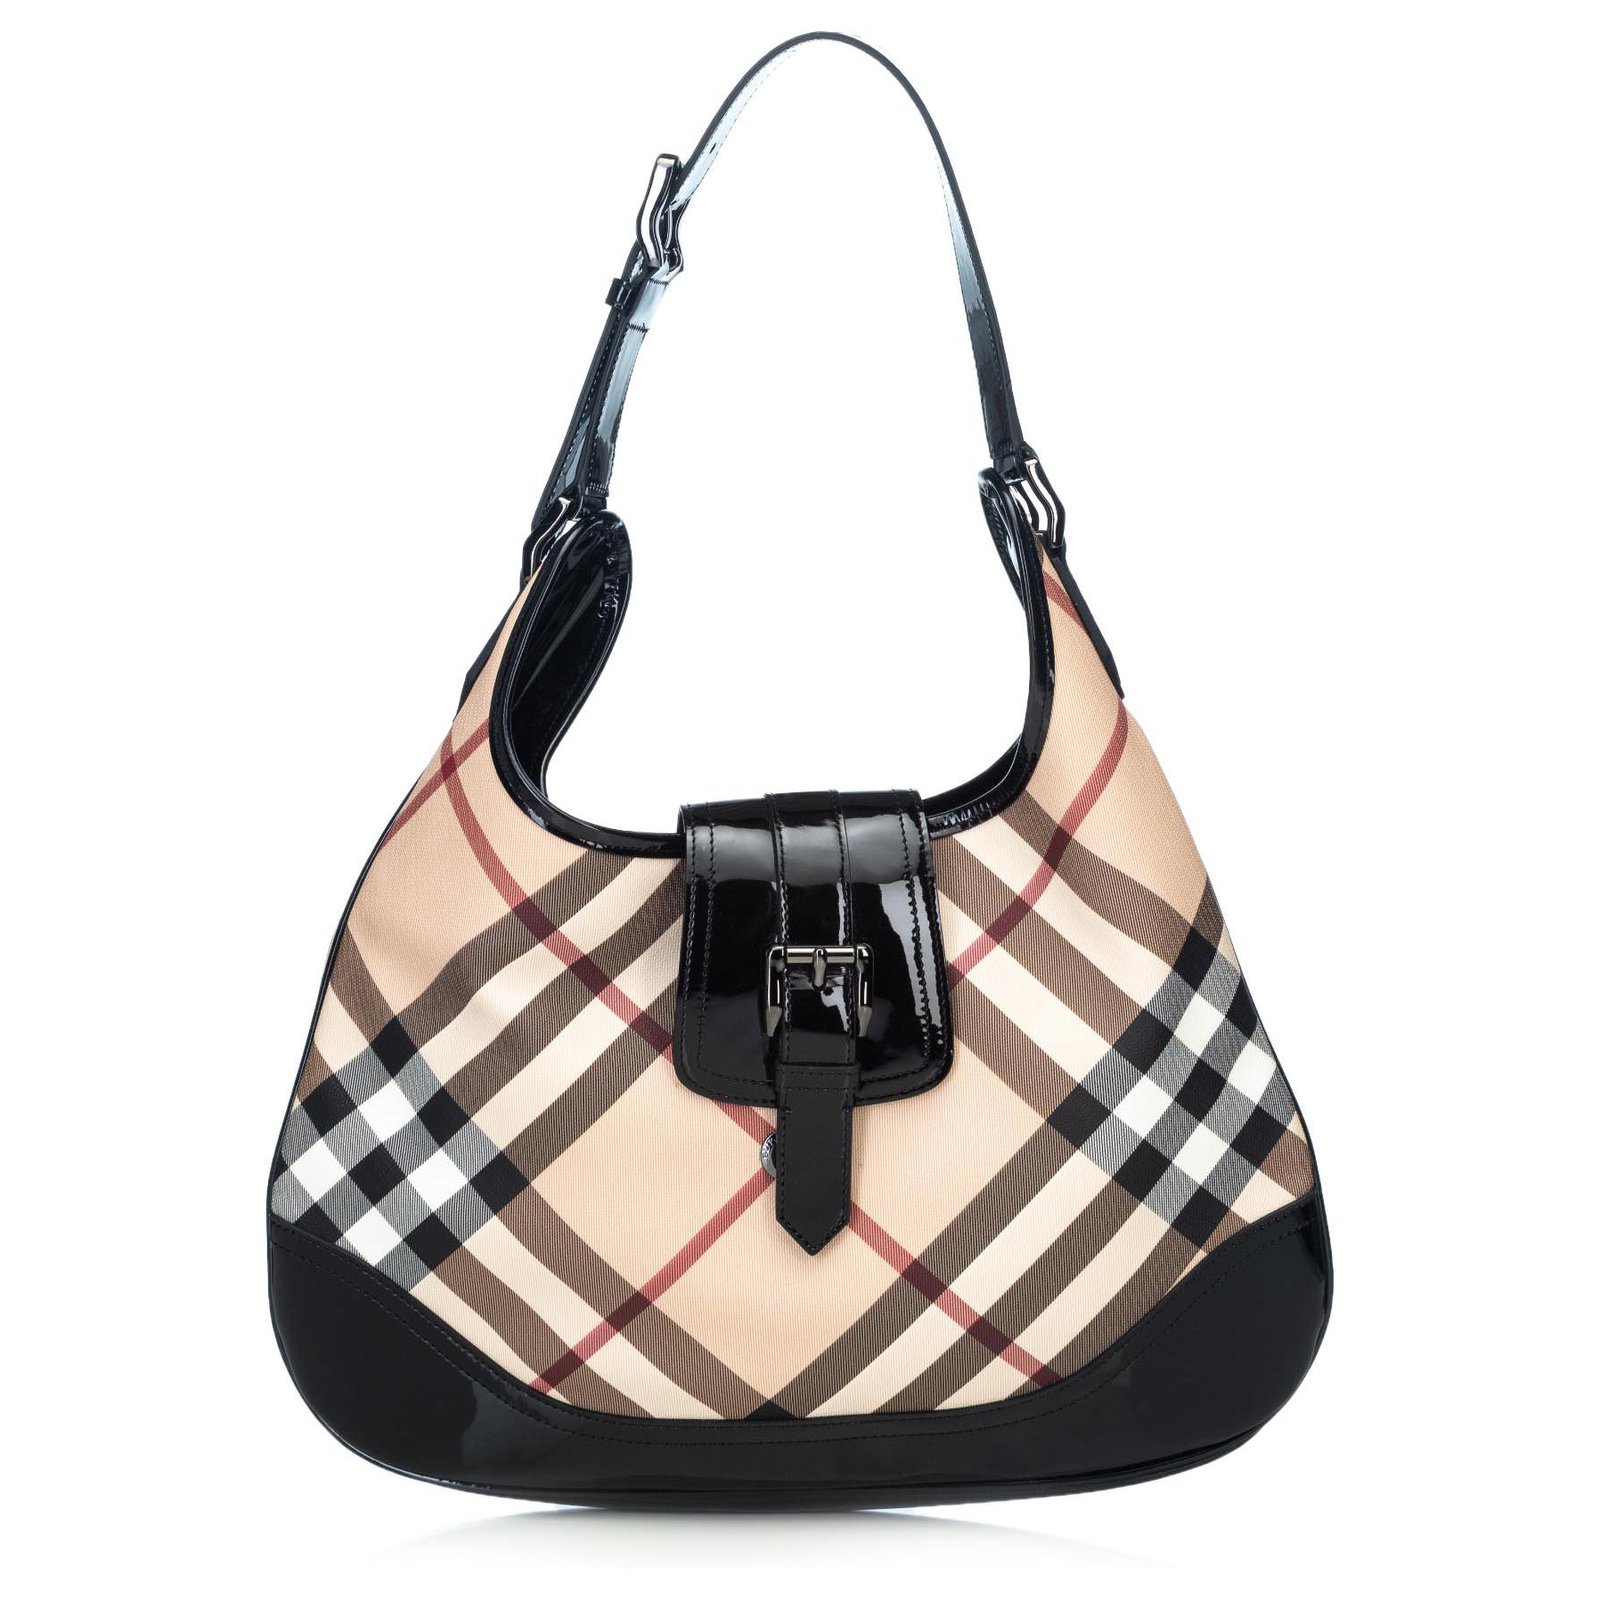 This chic hobo is crafted of classic Burberry Nova check canvas.